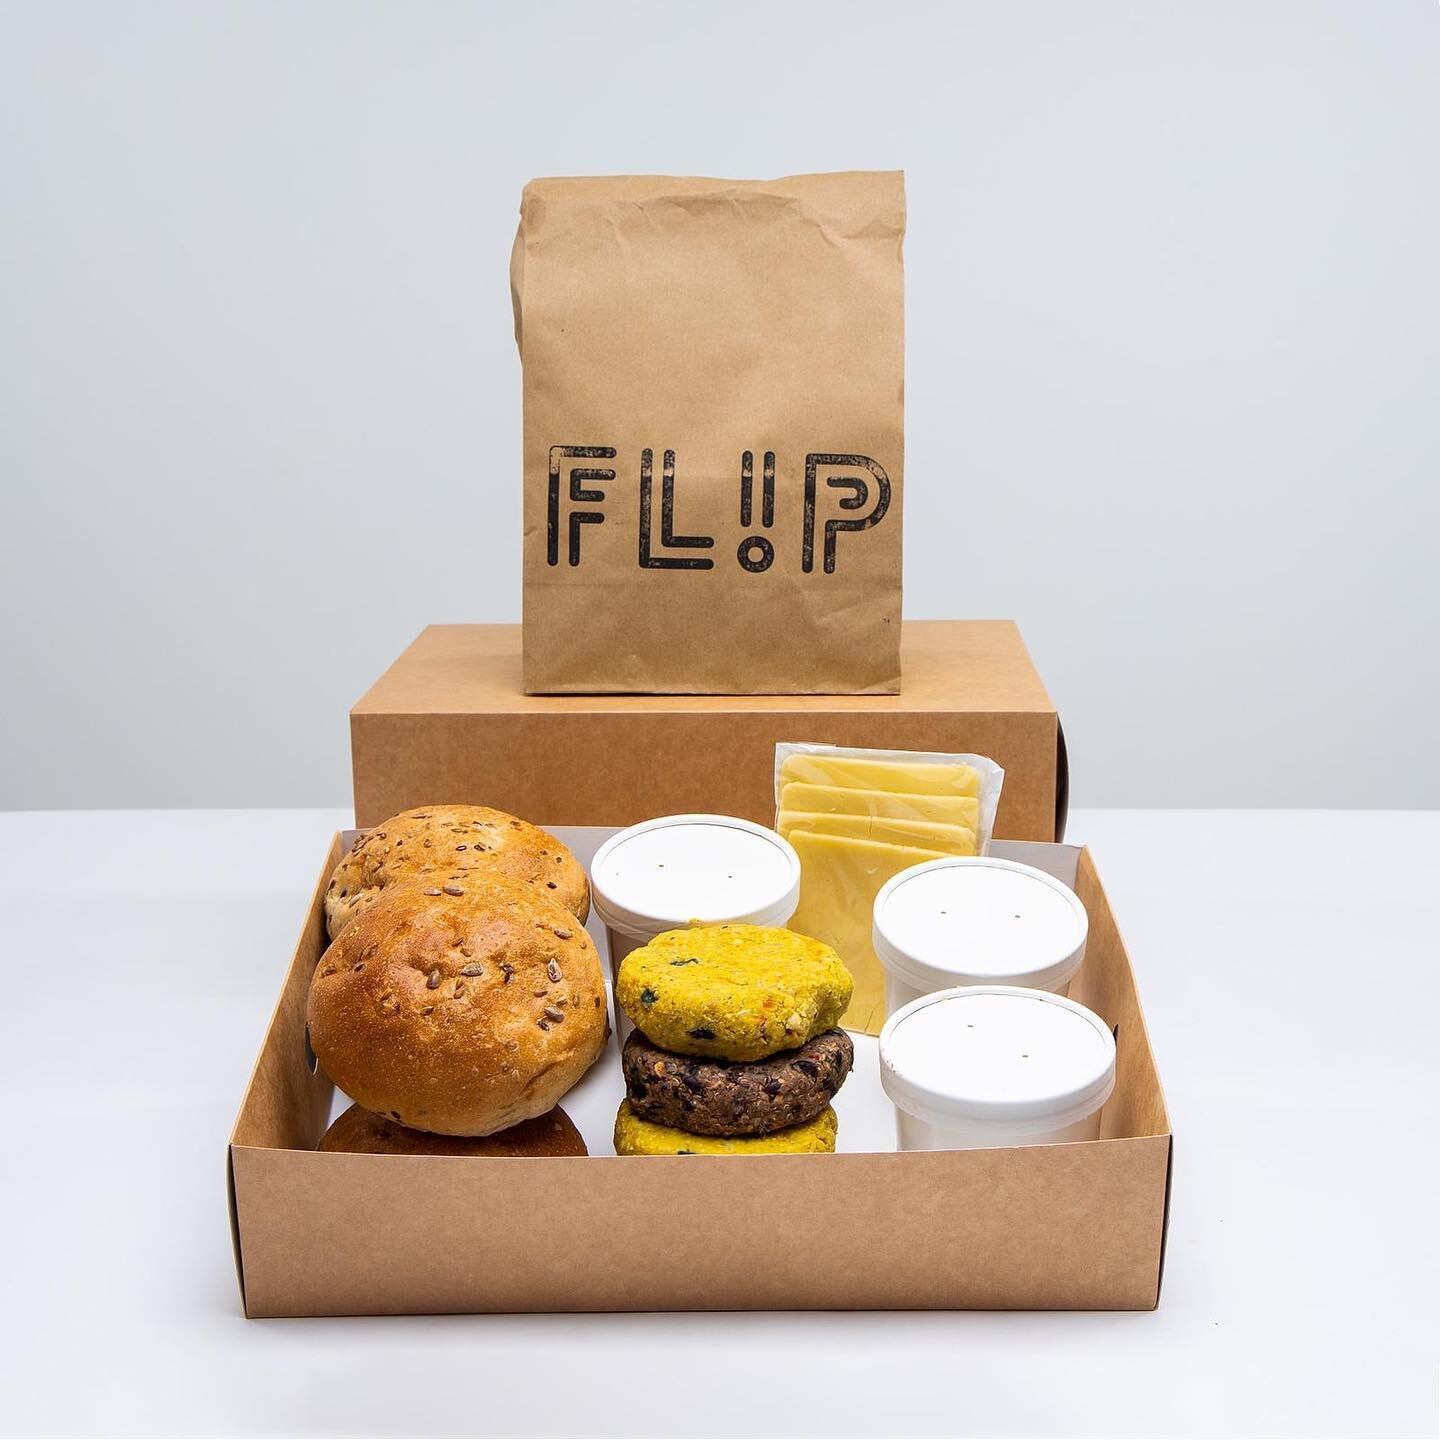 Having a BBQ our FLIP@Home is available to order !!
Click &amp; Collect 
4 burgers of your choice 
4 Organic Seeded Buns 
Vegan or vegetarian cheese 
Toppings for burgers
All condiments 
We&rsquo;ve even included the lettuce !! 
Enjoy them 💛🍔
Link 